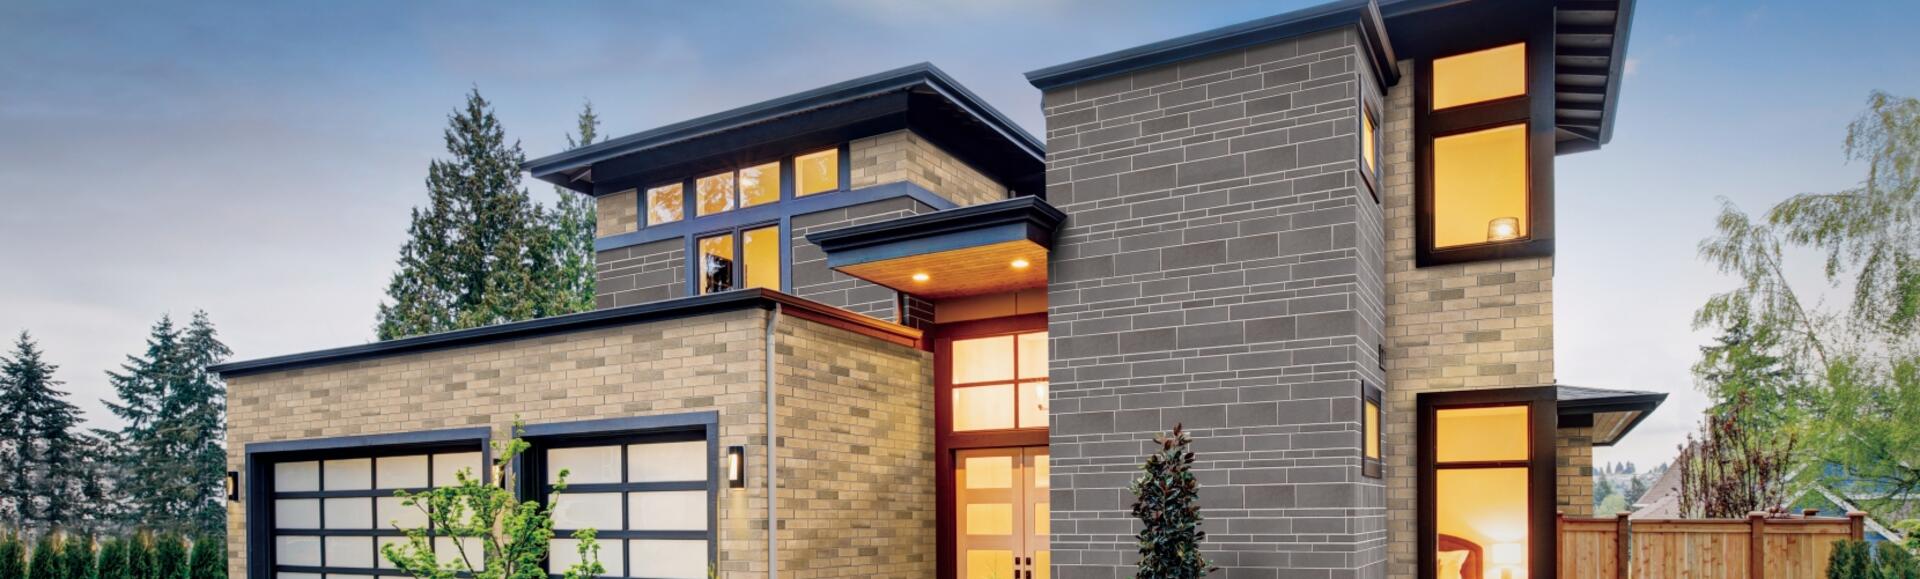 House using brick and stone products from Brampton Brick